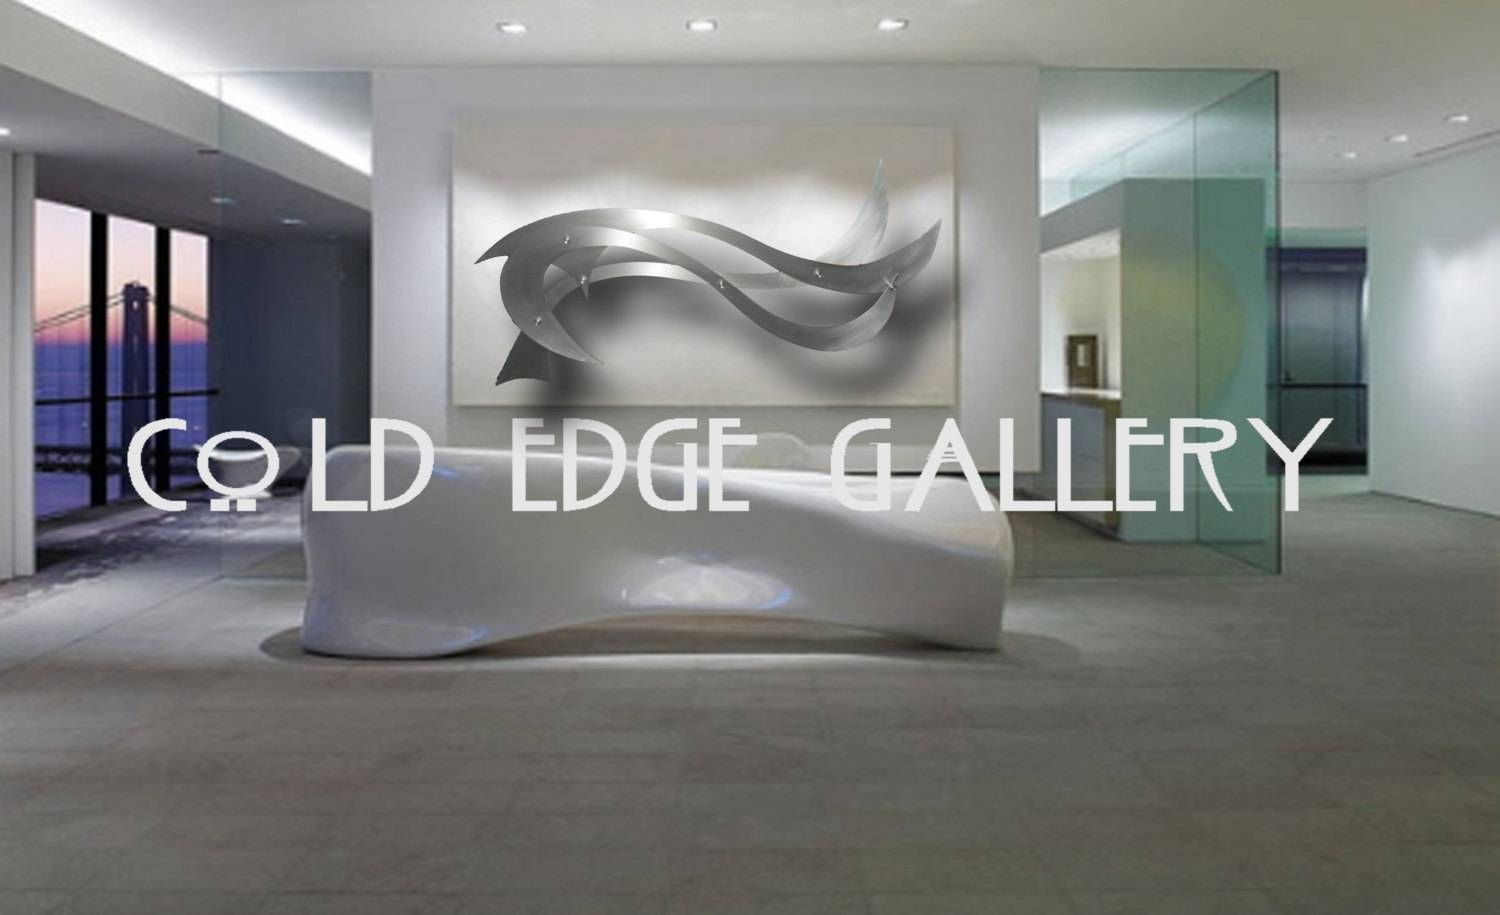 Large Metal Wall Art Corporate Wall Art Extra Large Wall Throughout Current Oversized Wall Art Contemporary (View 1 of 20)